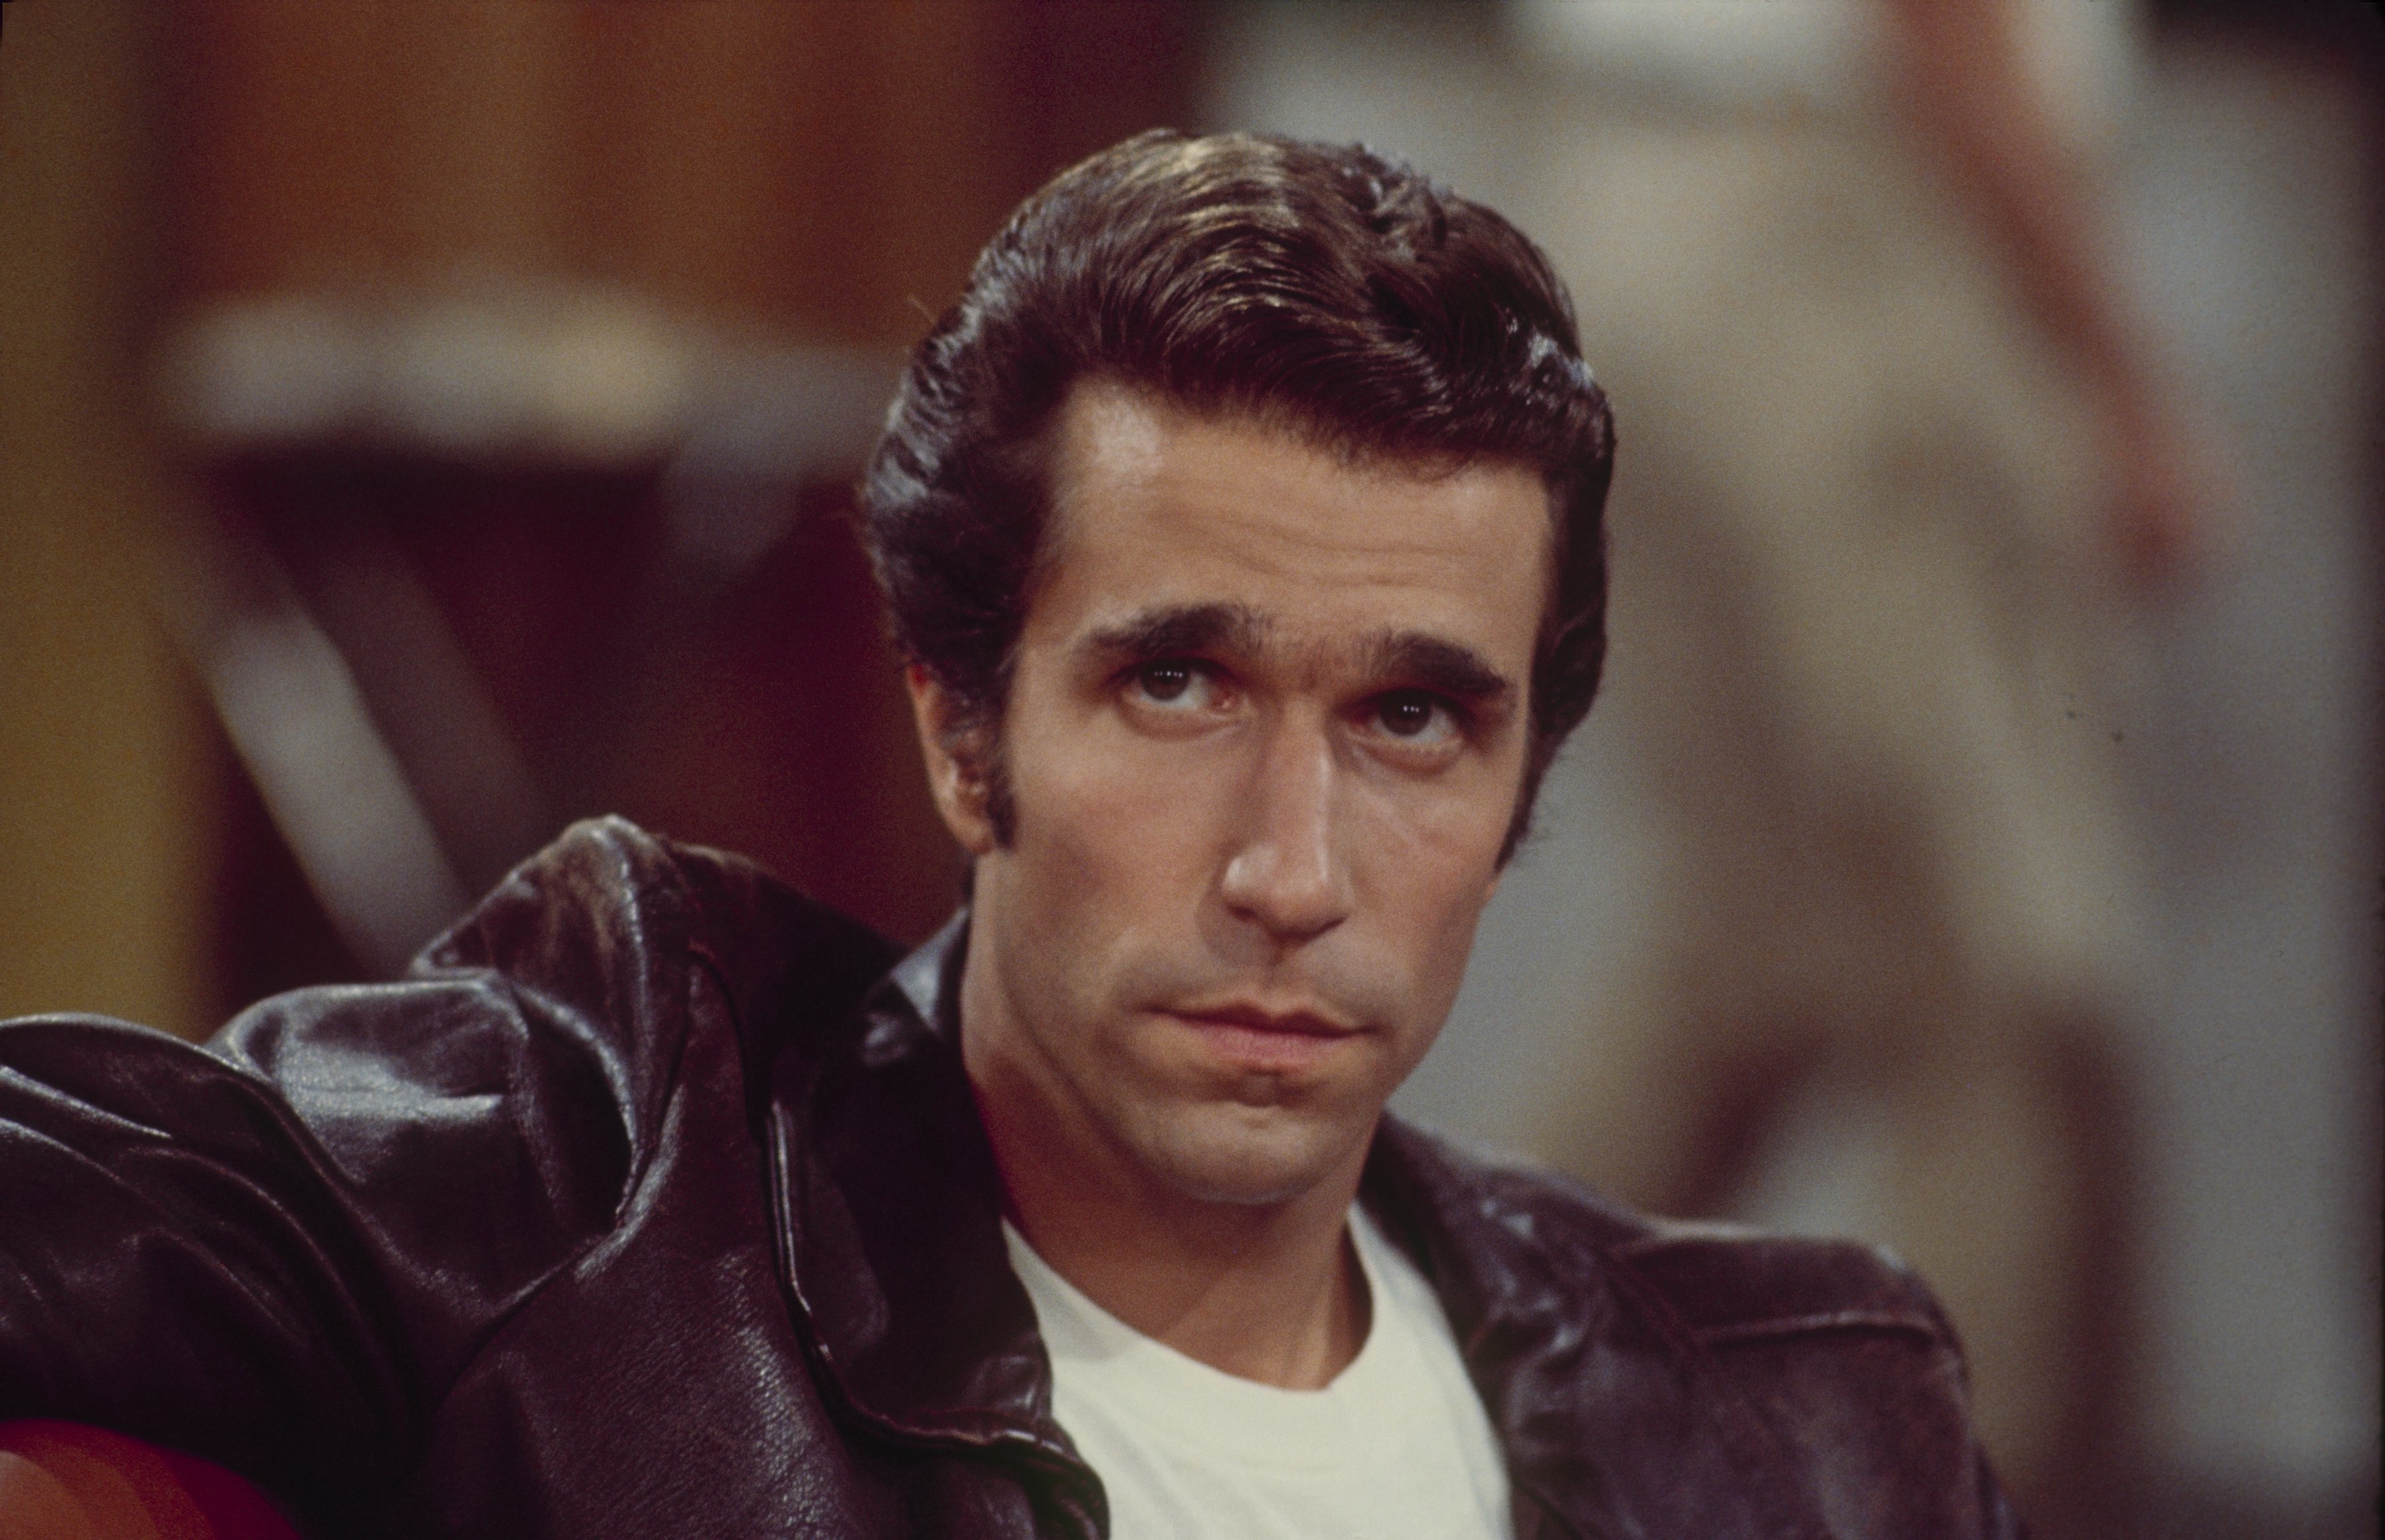 Henry Winkler during an episode of "Fonzie Loves Pinky." | Source: Getty Images